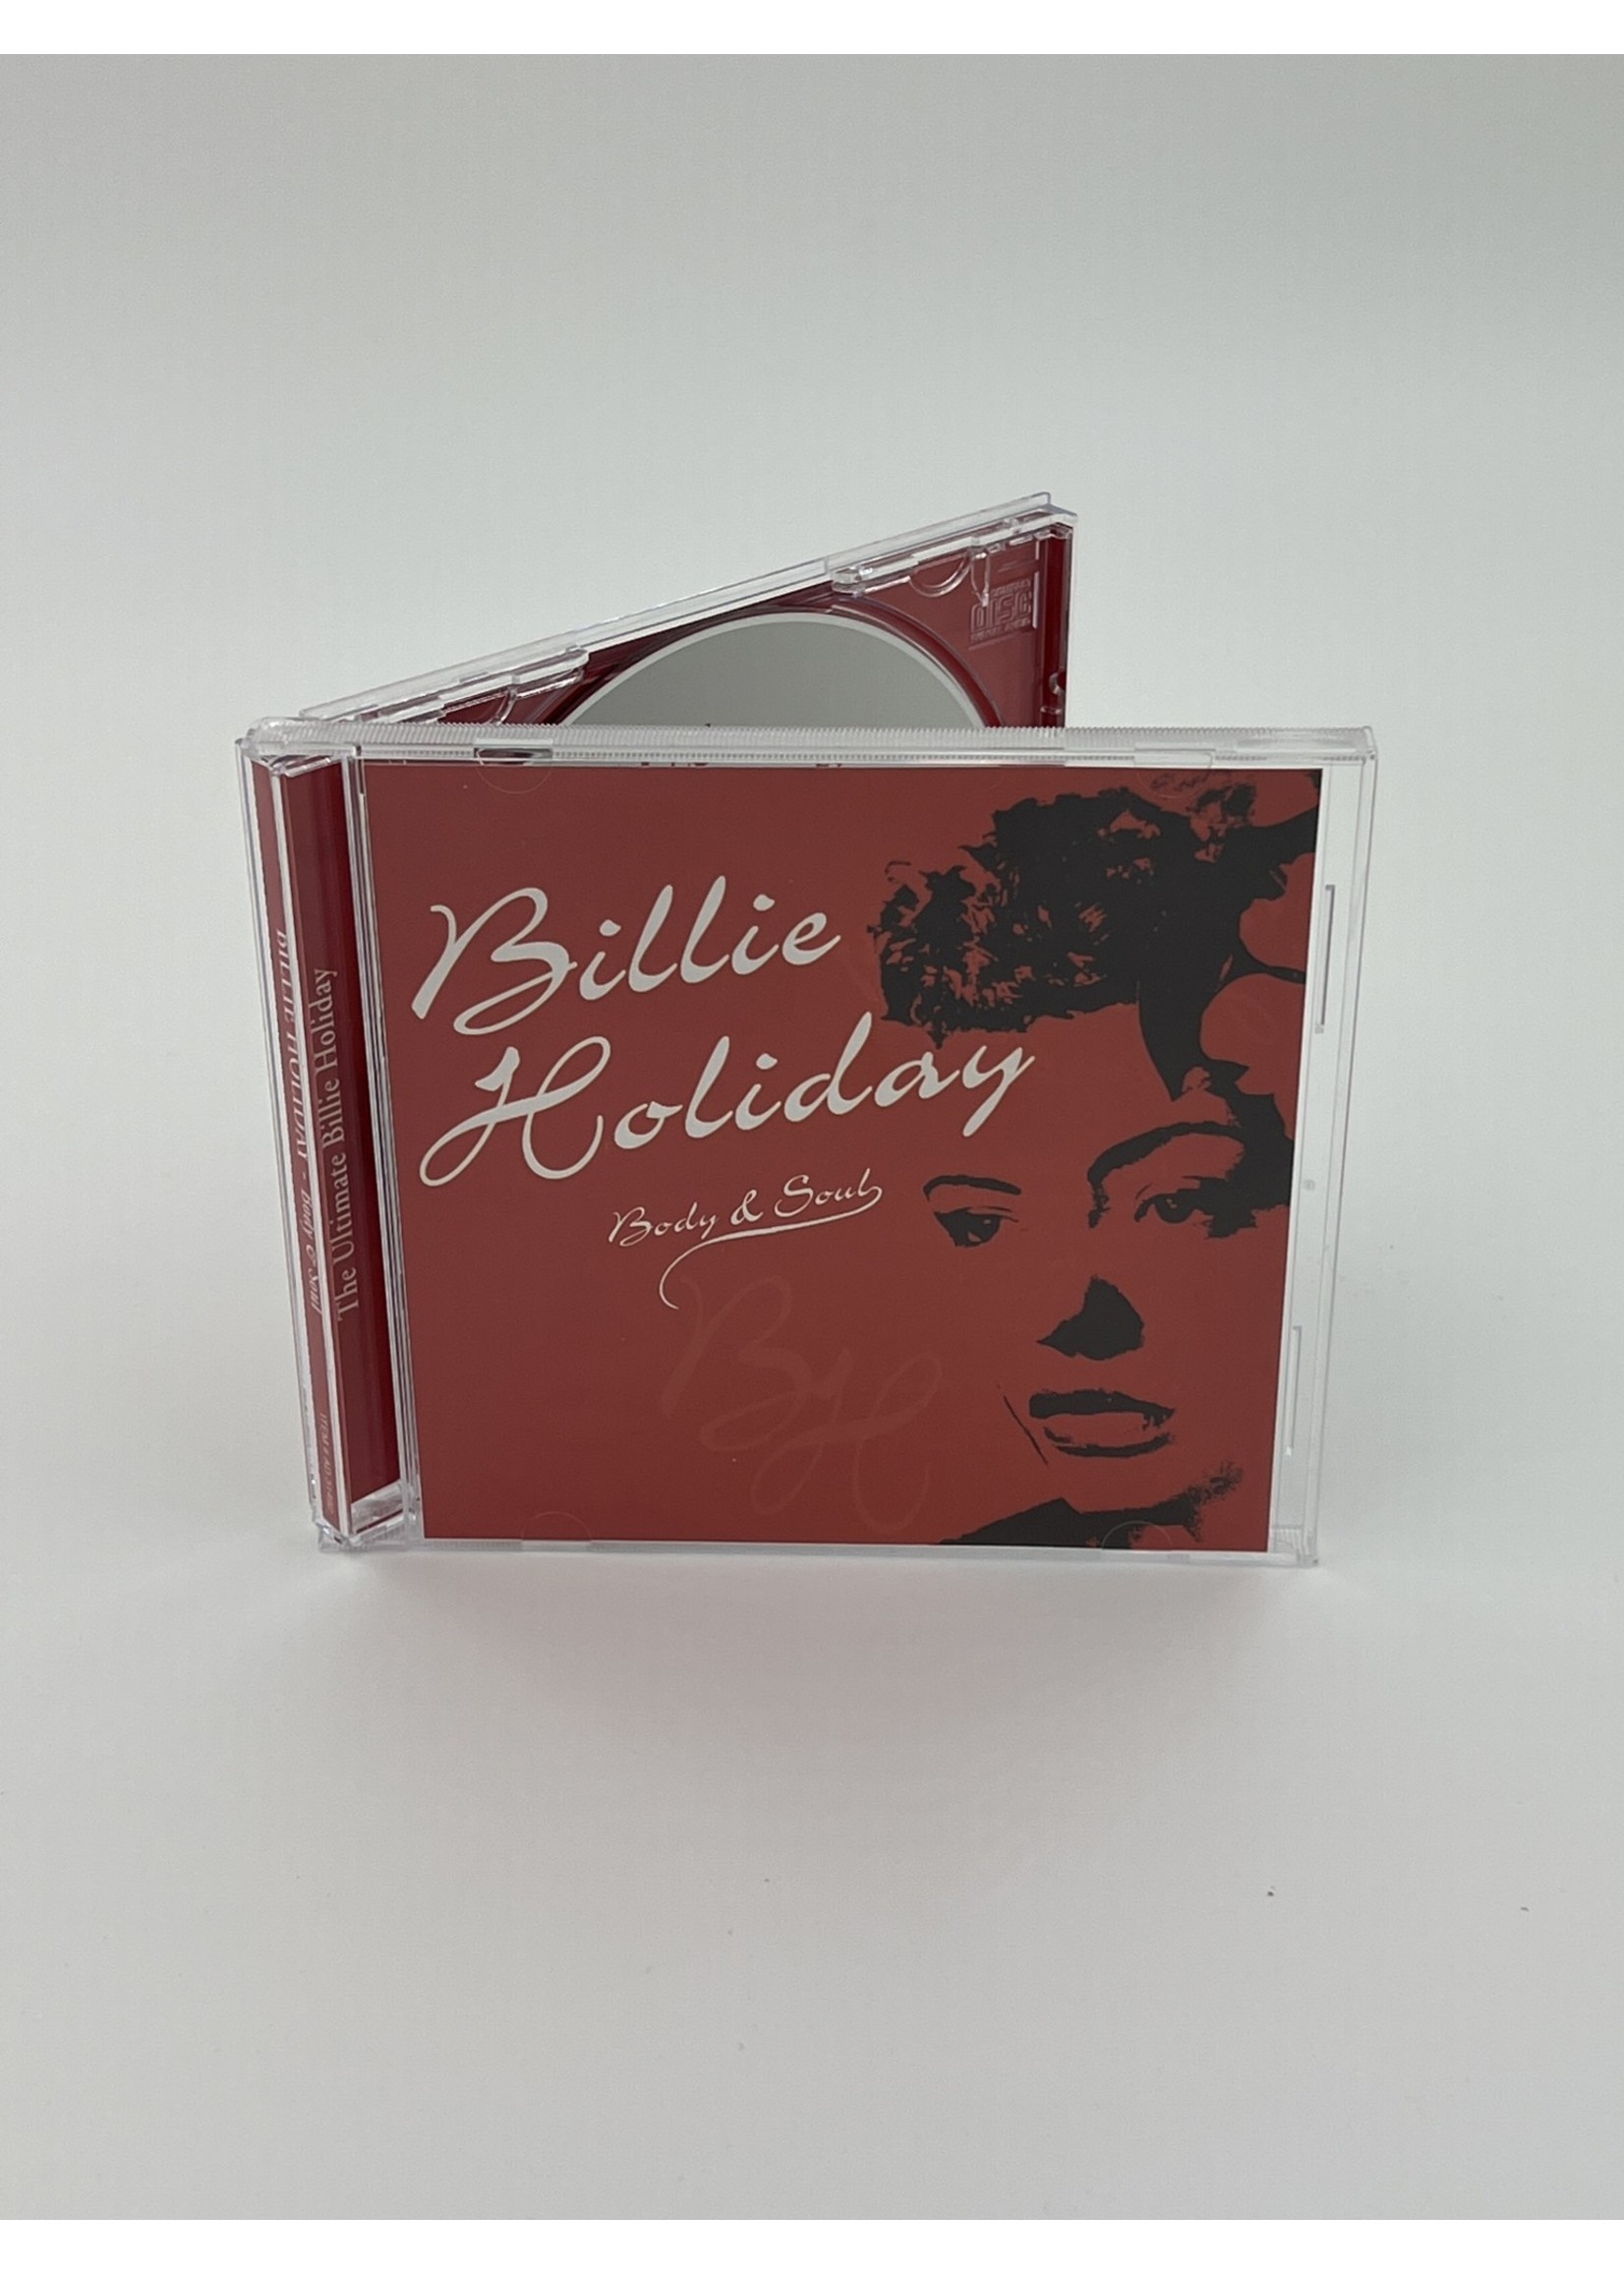 CD Billie Holiday Body And Soul Cd